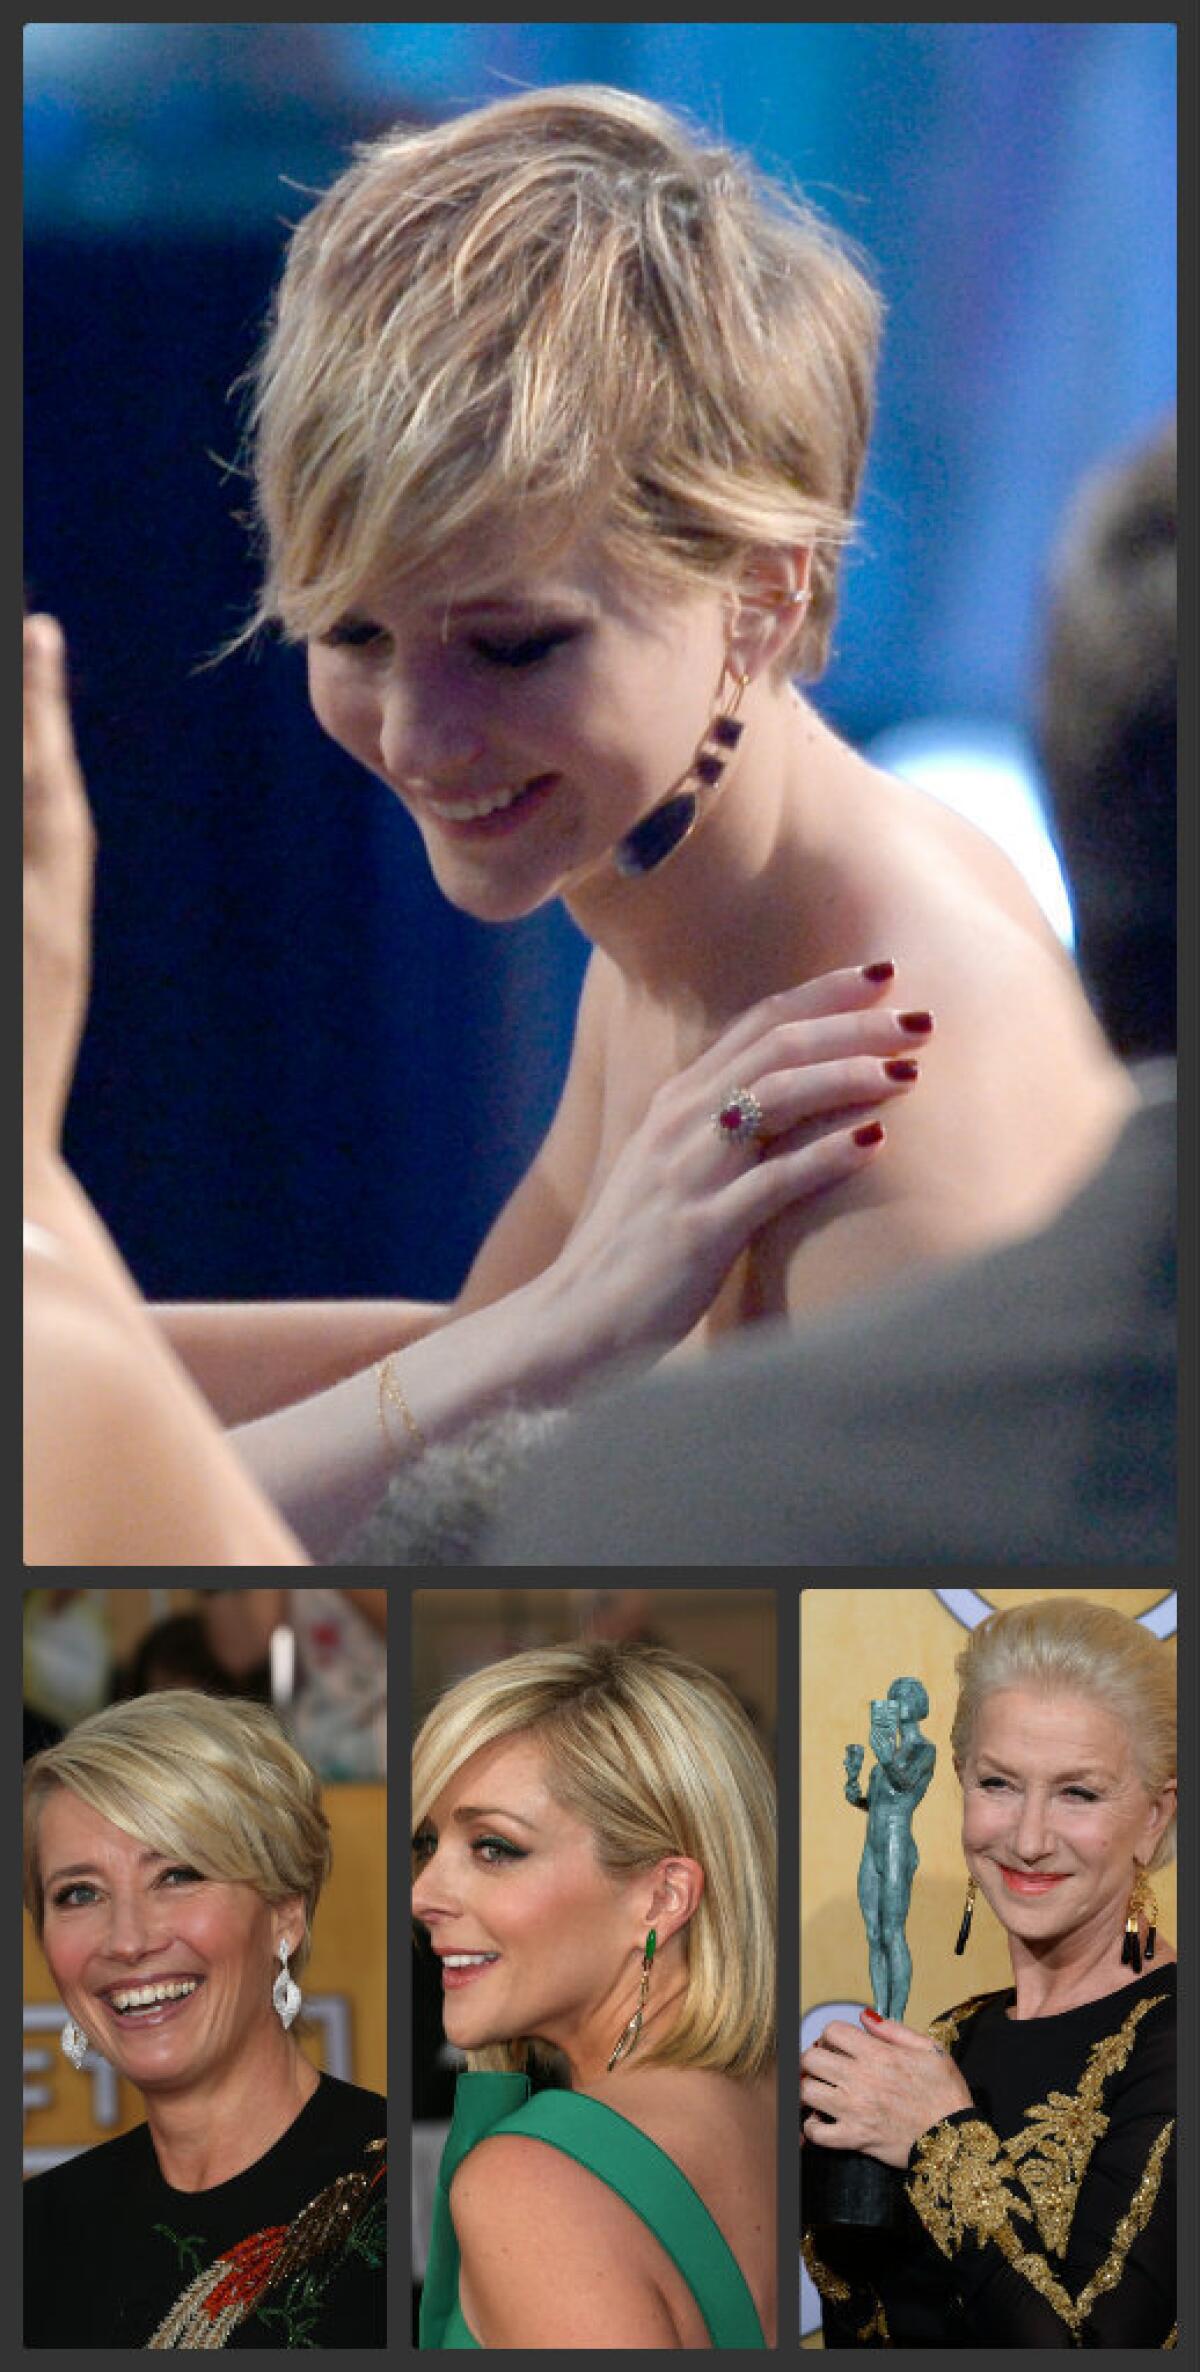 Short hairstyles were sported at the SAG awards by actresses including, clockwise from top, Jennifer Lawrence, Helen Mirren, Jane Krakowski and Emma Thompson.